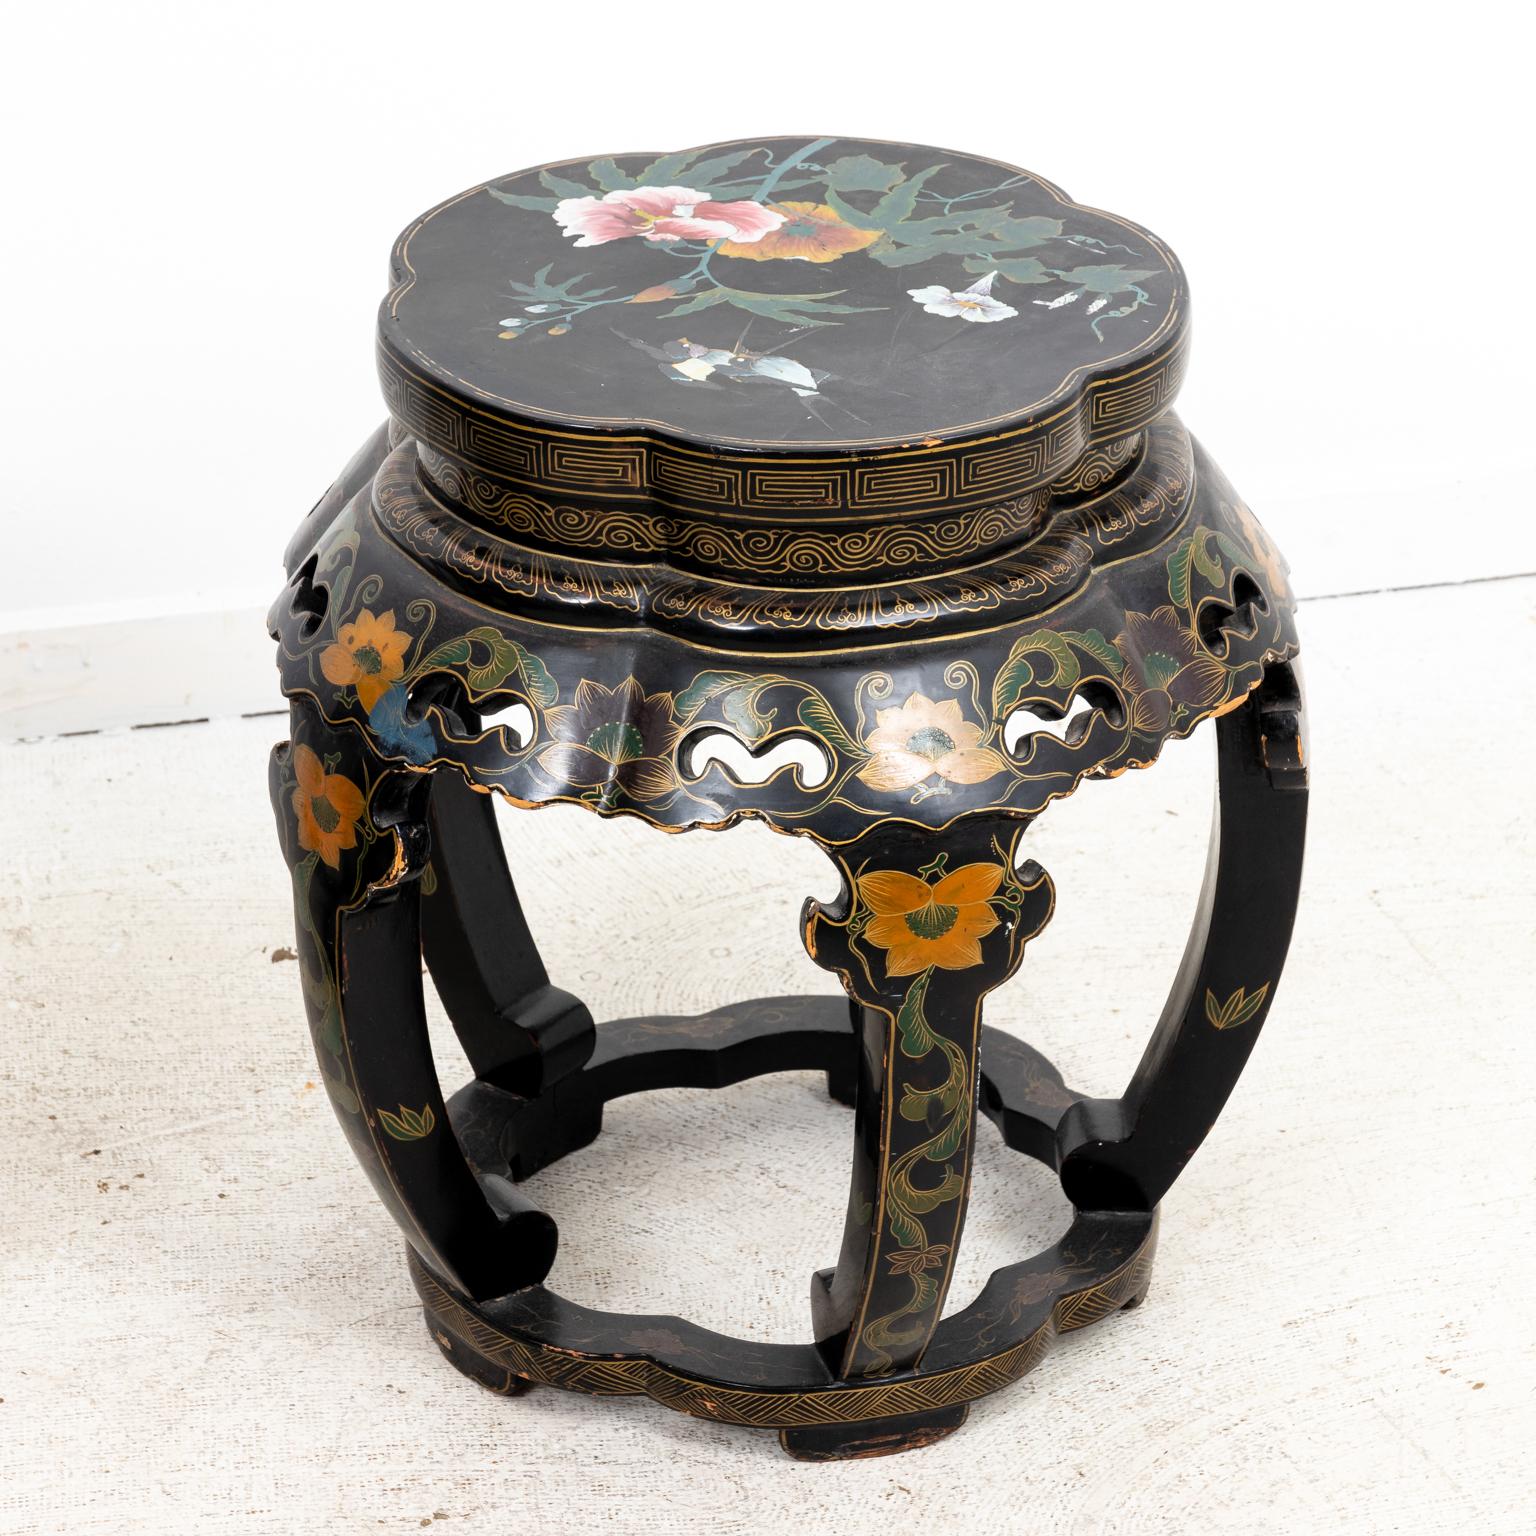 Pair of Chinese lacquered stools, heavily decorated with floral motifs and a carved skirt. The piece is also ornamented with Greek key trim and birds. Please note of wear consistent with age including minor paint loss and finish loss.